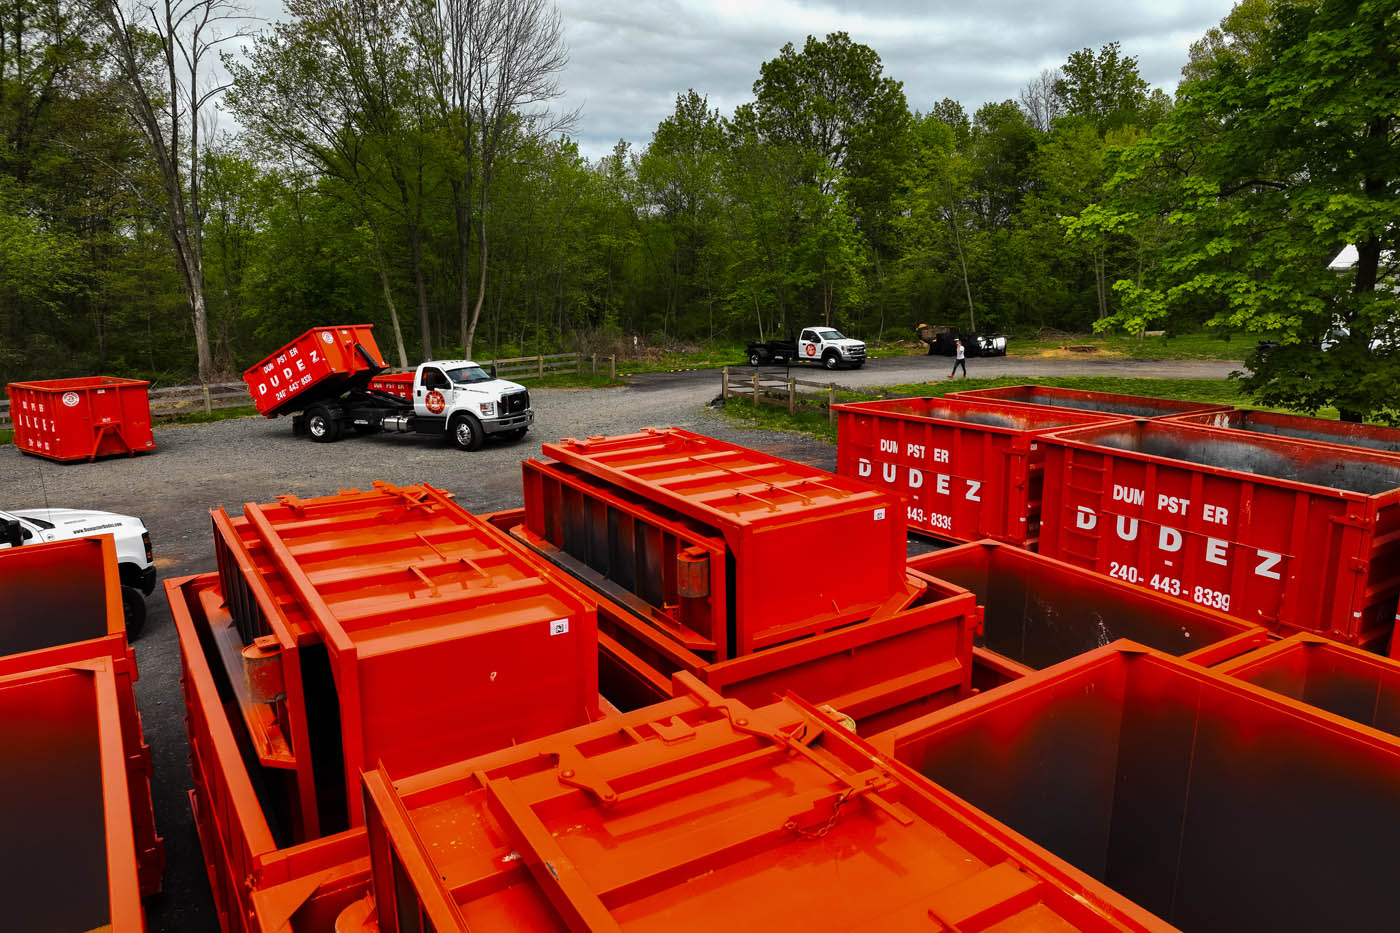 Different sized dumpsters from Dumpster Dudez - learn more about the different size options we offer!